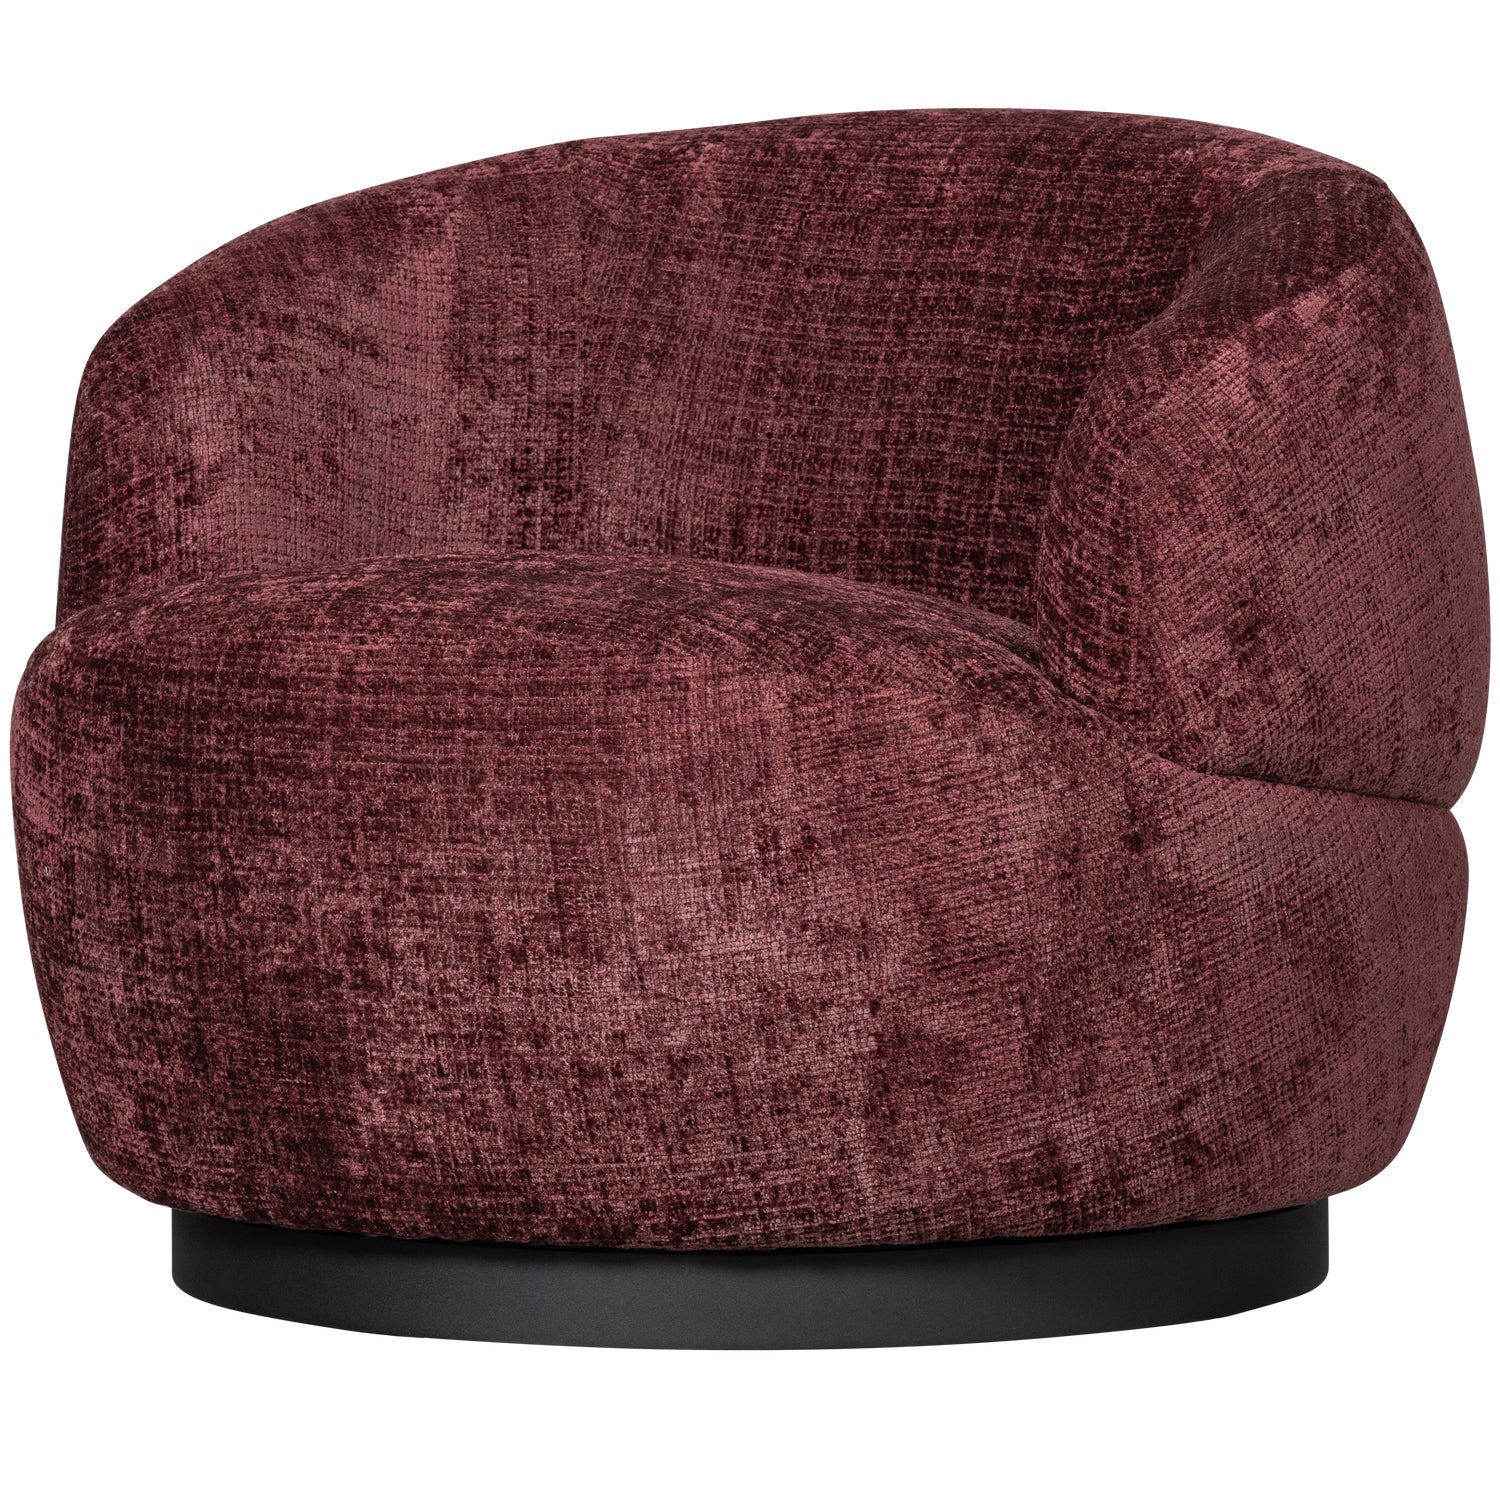 800037-A-02_VS_FA_Woolly_draaifauteuil_chenille_aubergine_SA.png?auto=webp&format=png&width=1500&height=1500